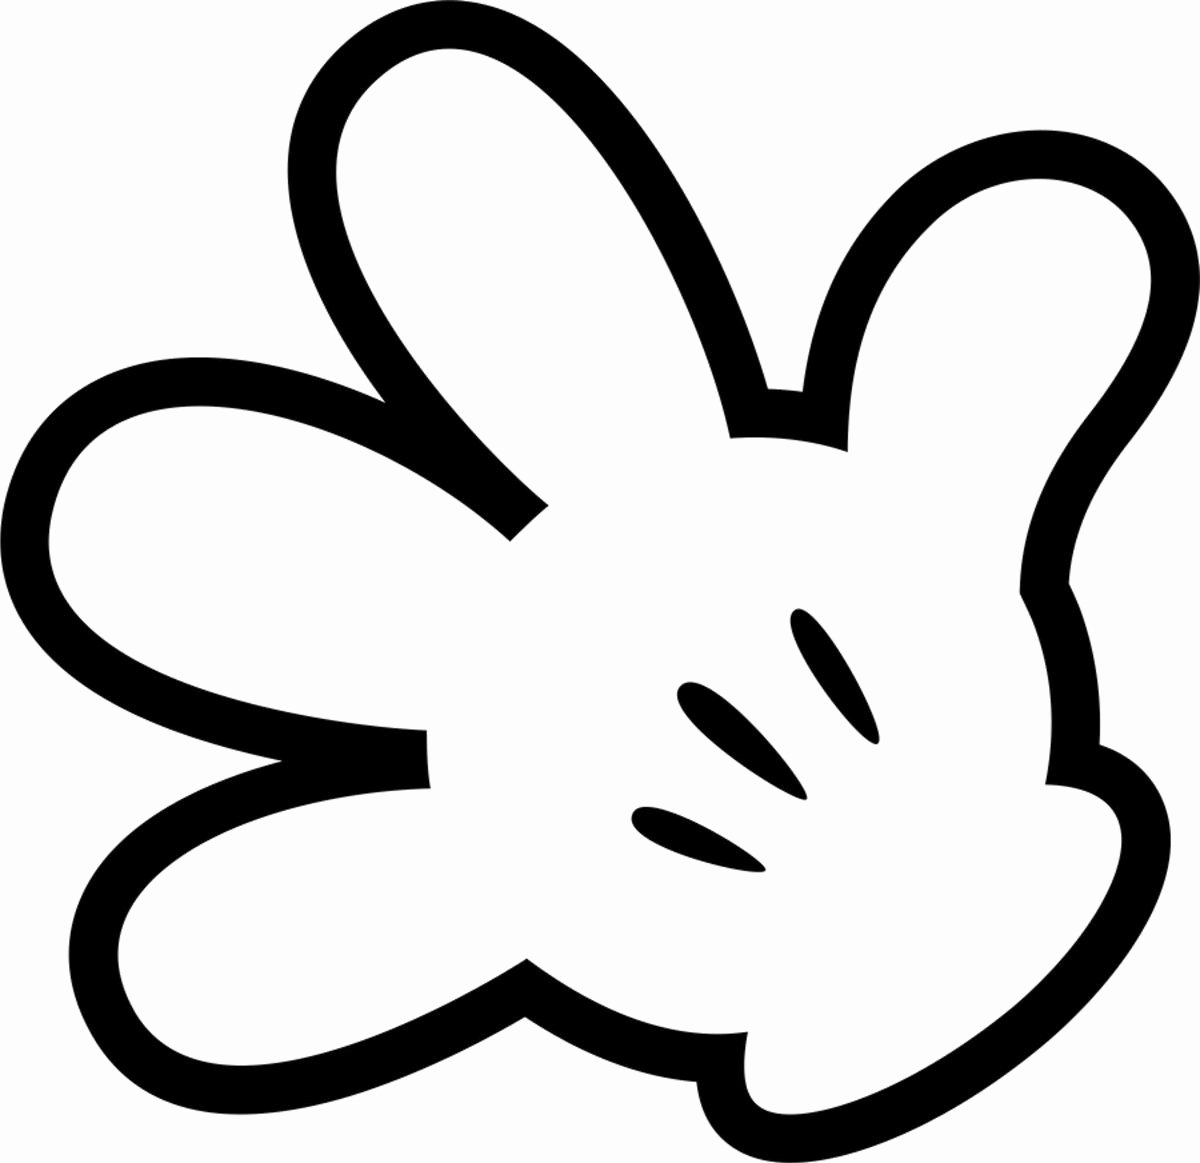 Minnie Mouse Hands Template Beautiful Mickey Hand Clip Art Mickey Mouse Hands Clipart Clipart